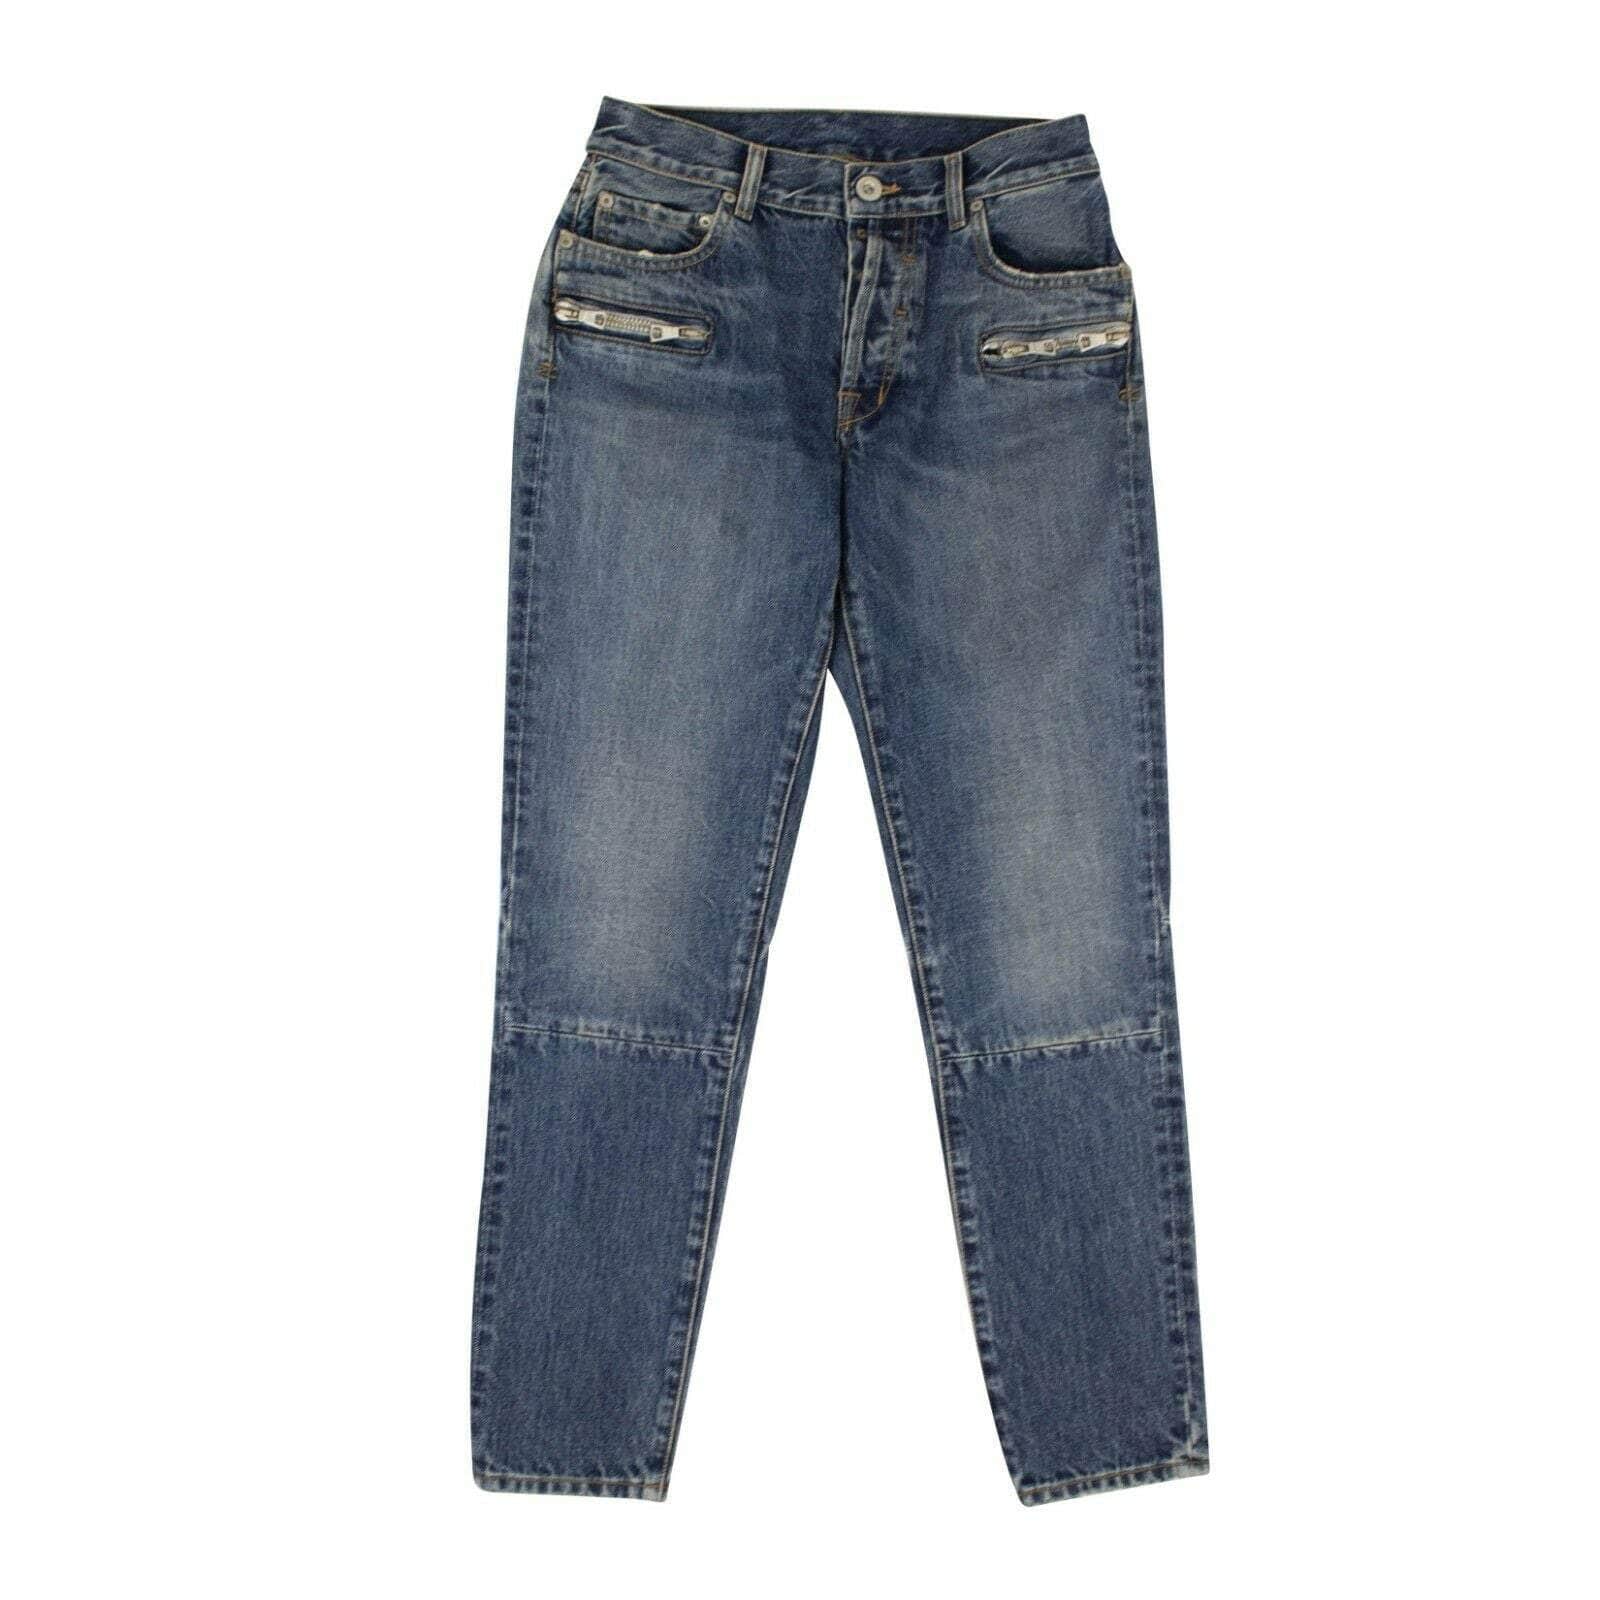 UNRAVEL PROJECT channelenable-all, couponcollection, gender-womens, main-clothing, sale-enable, size-26, under-250, unravel-project, womens-straight-jeans 26 Blue Zipped Jeans 82NGG-UN-1189/26 82NGG-UN-1189/26